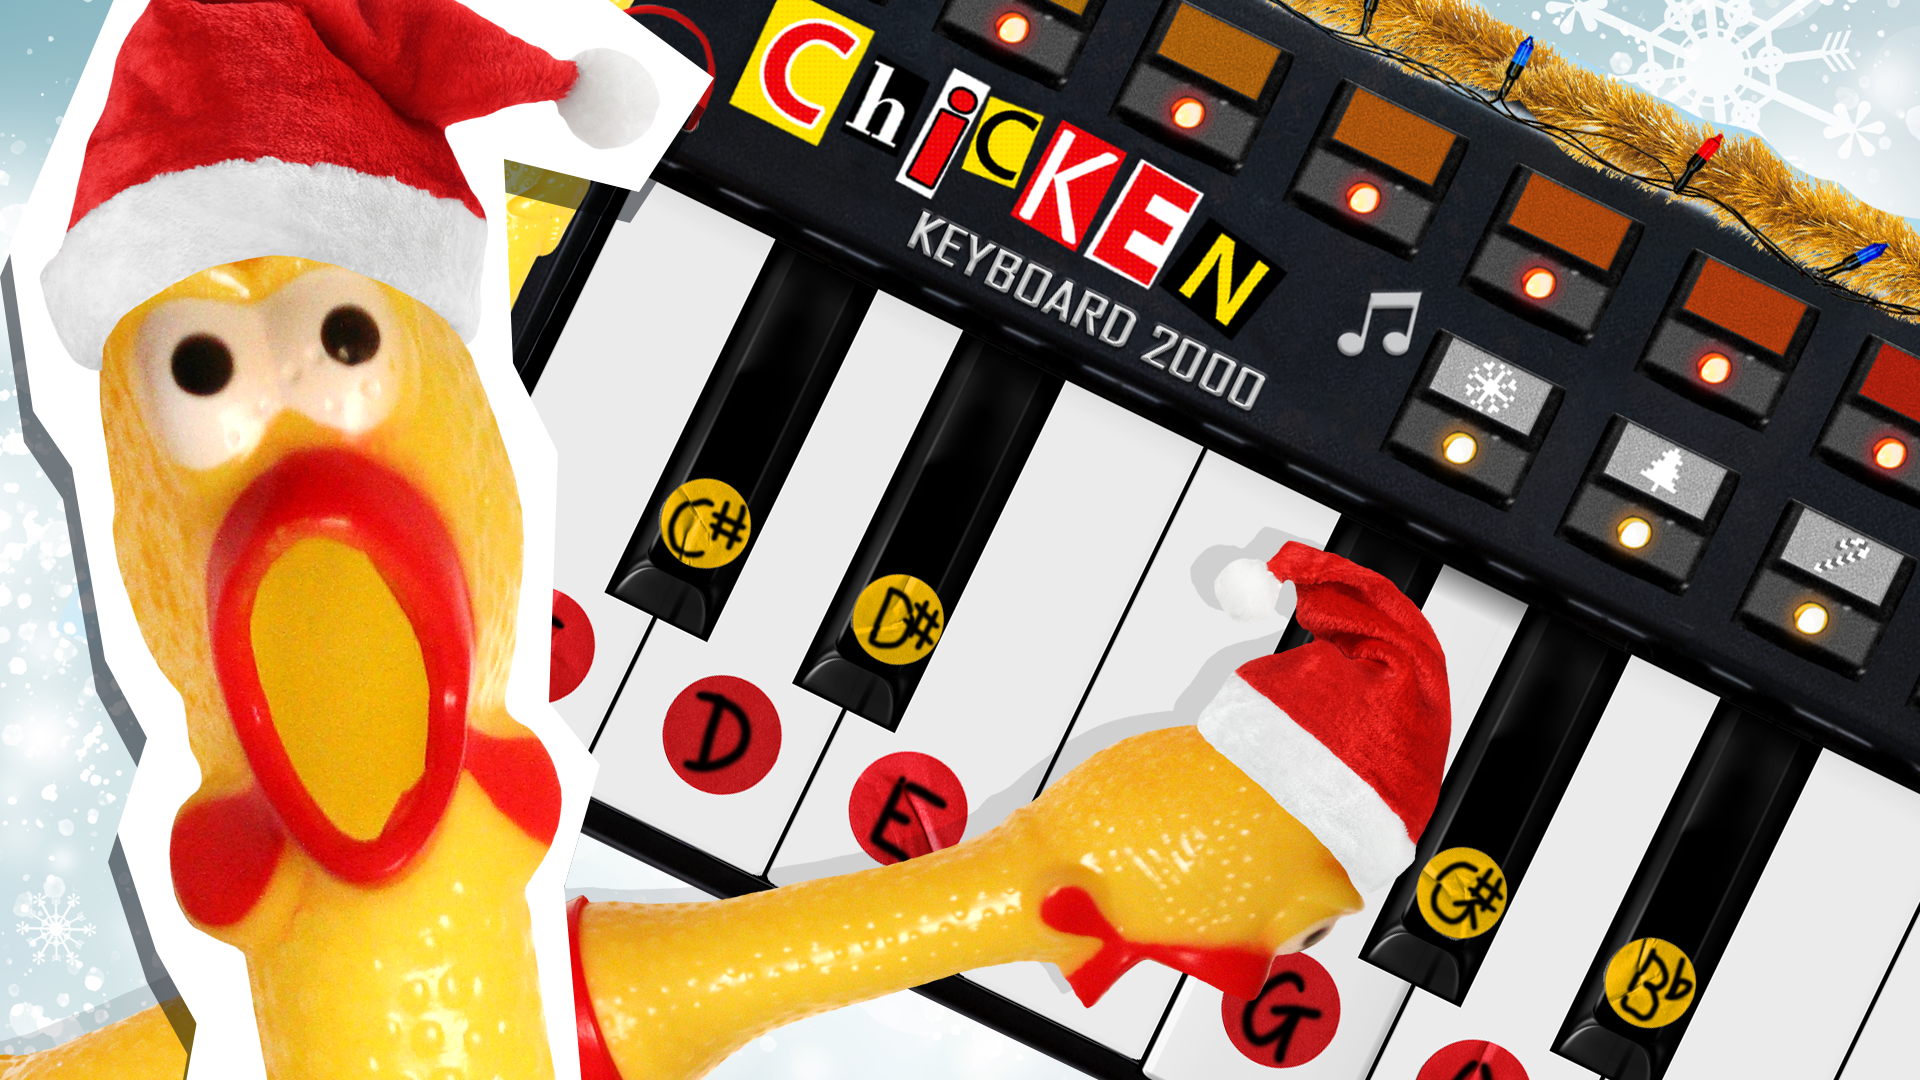 Rubber chicken in a Christmas hat slamming their face on a keyboard labelled "Chicken Keyboard 2000"